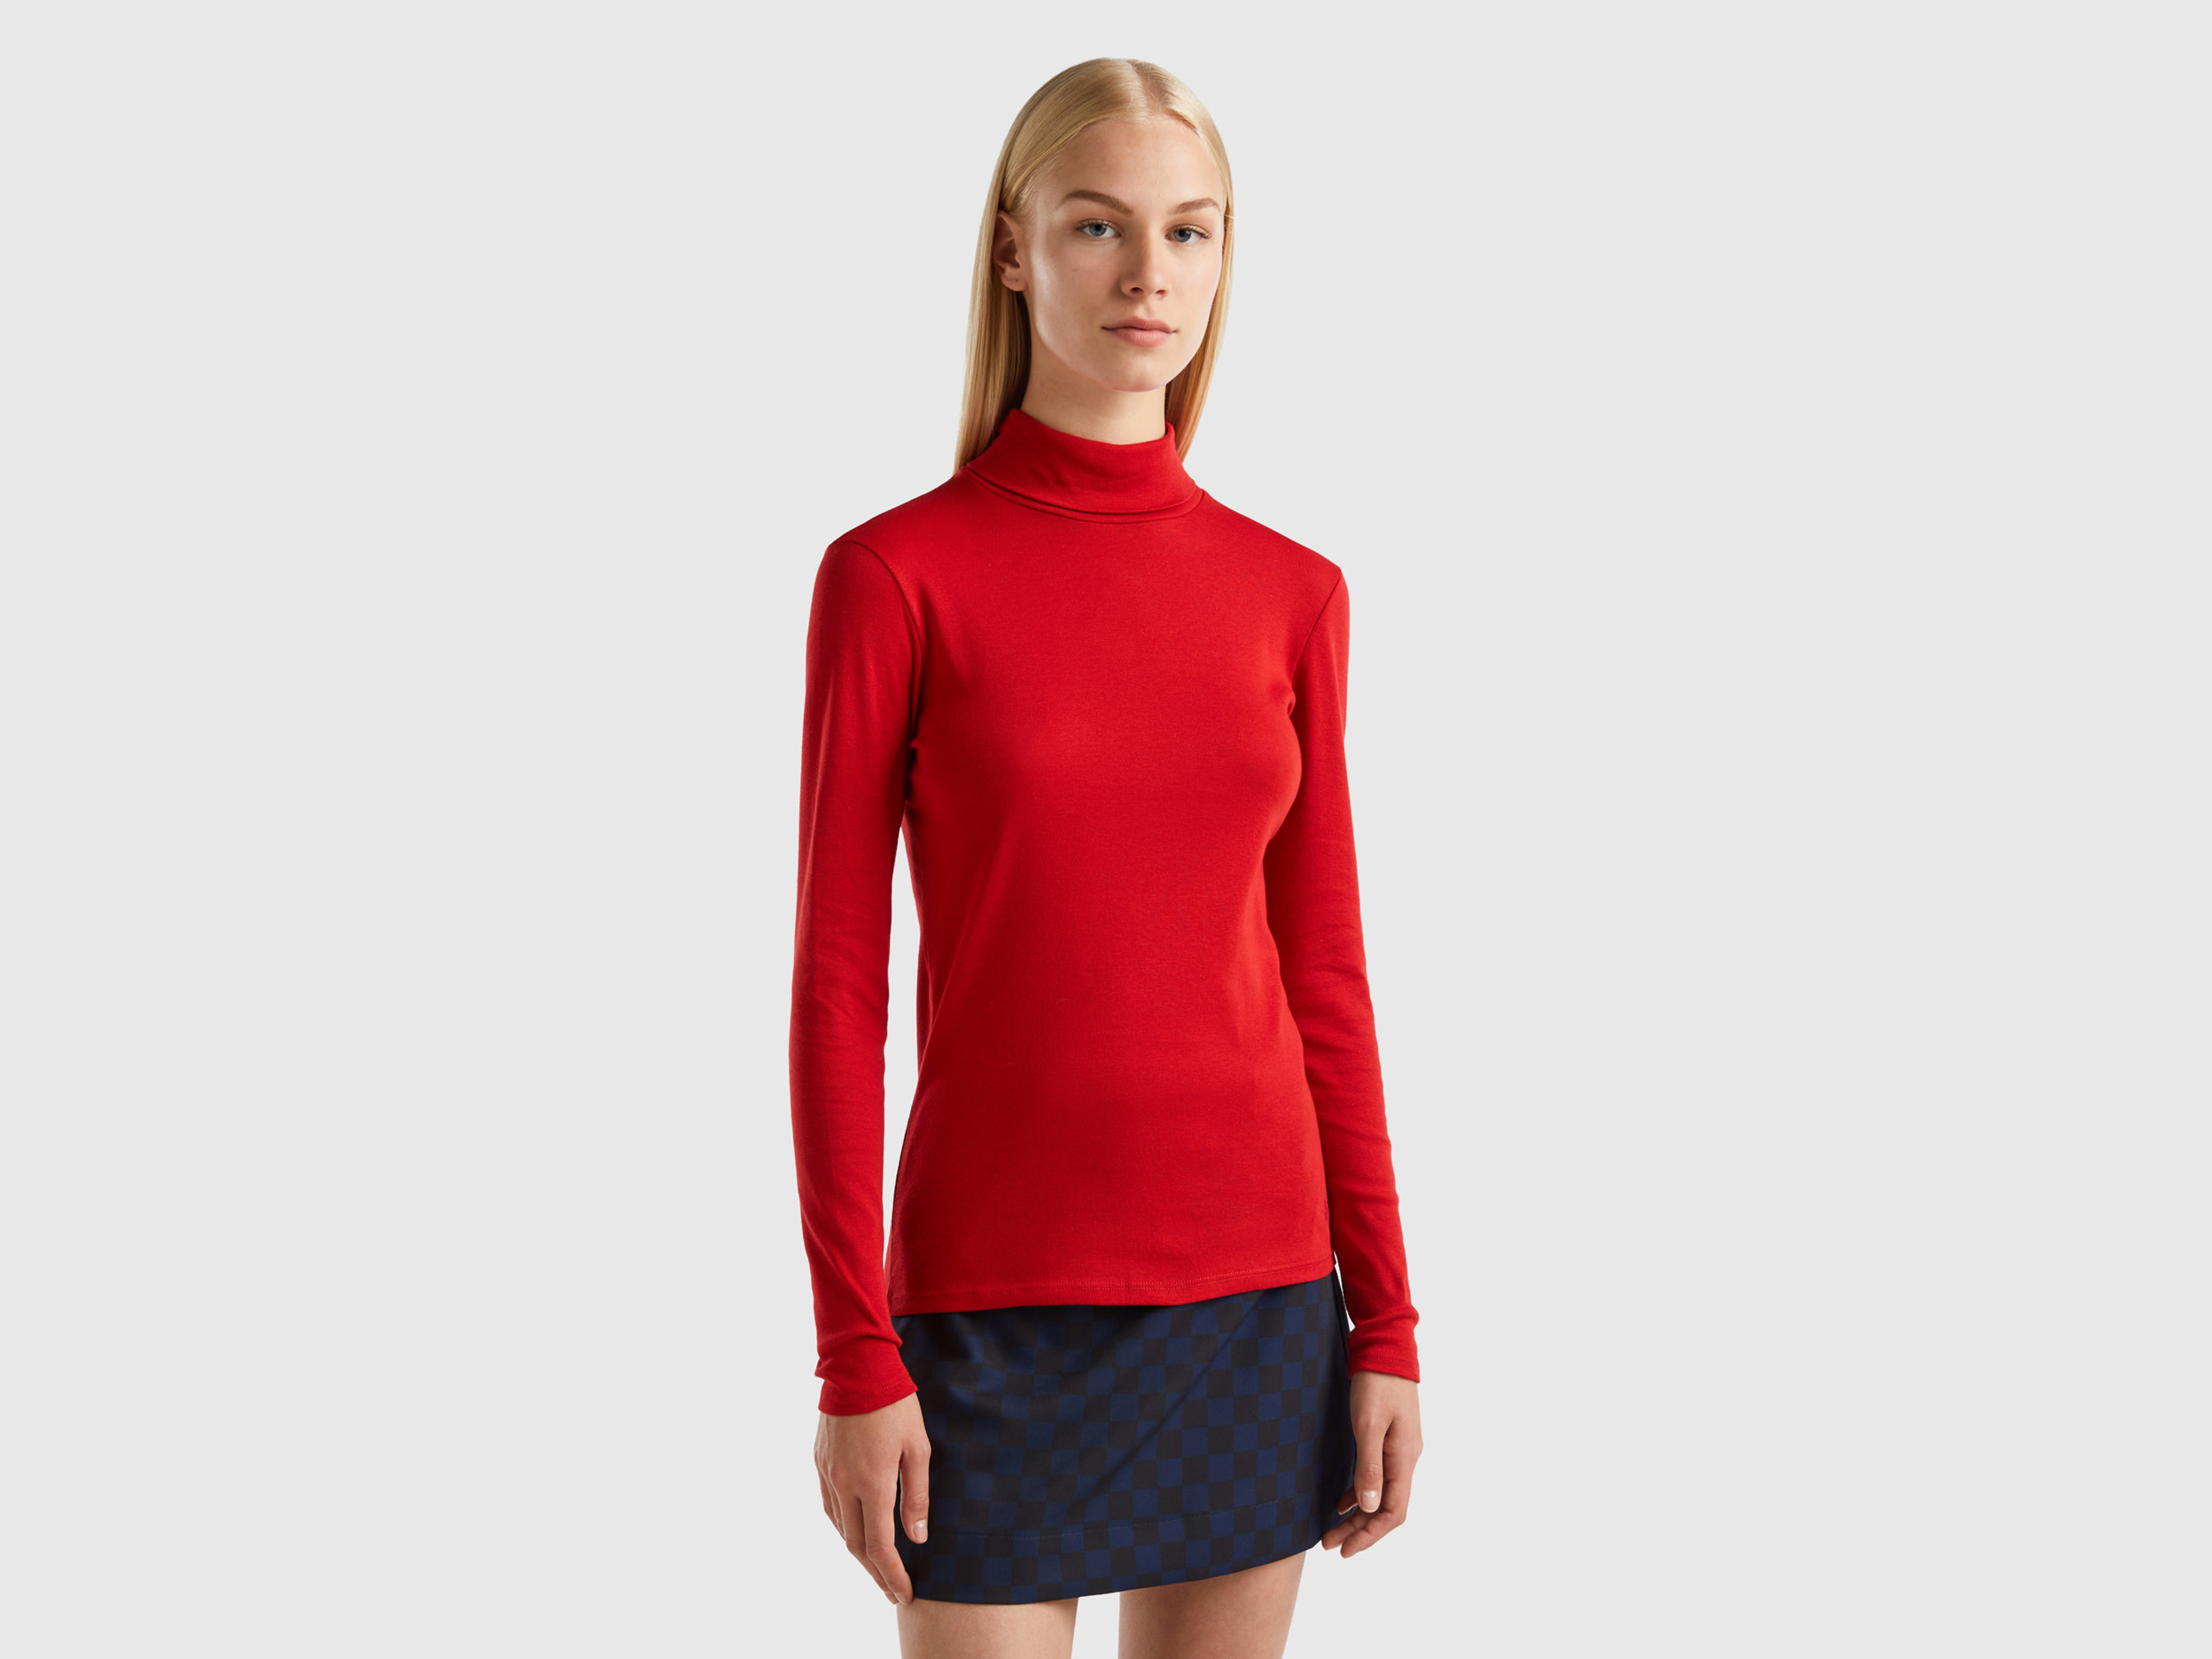 Benetton, Long Sleeve T-shirt With High Neck, size XS, Red, Women